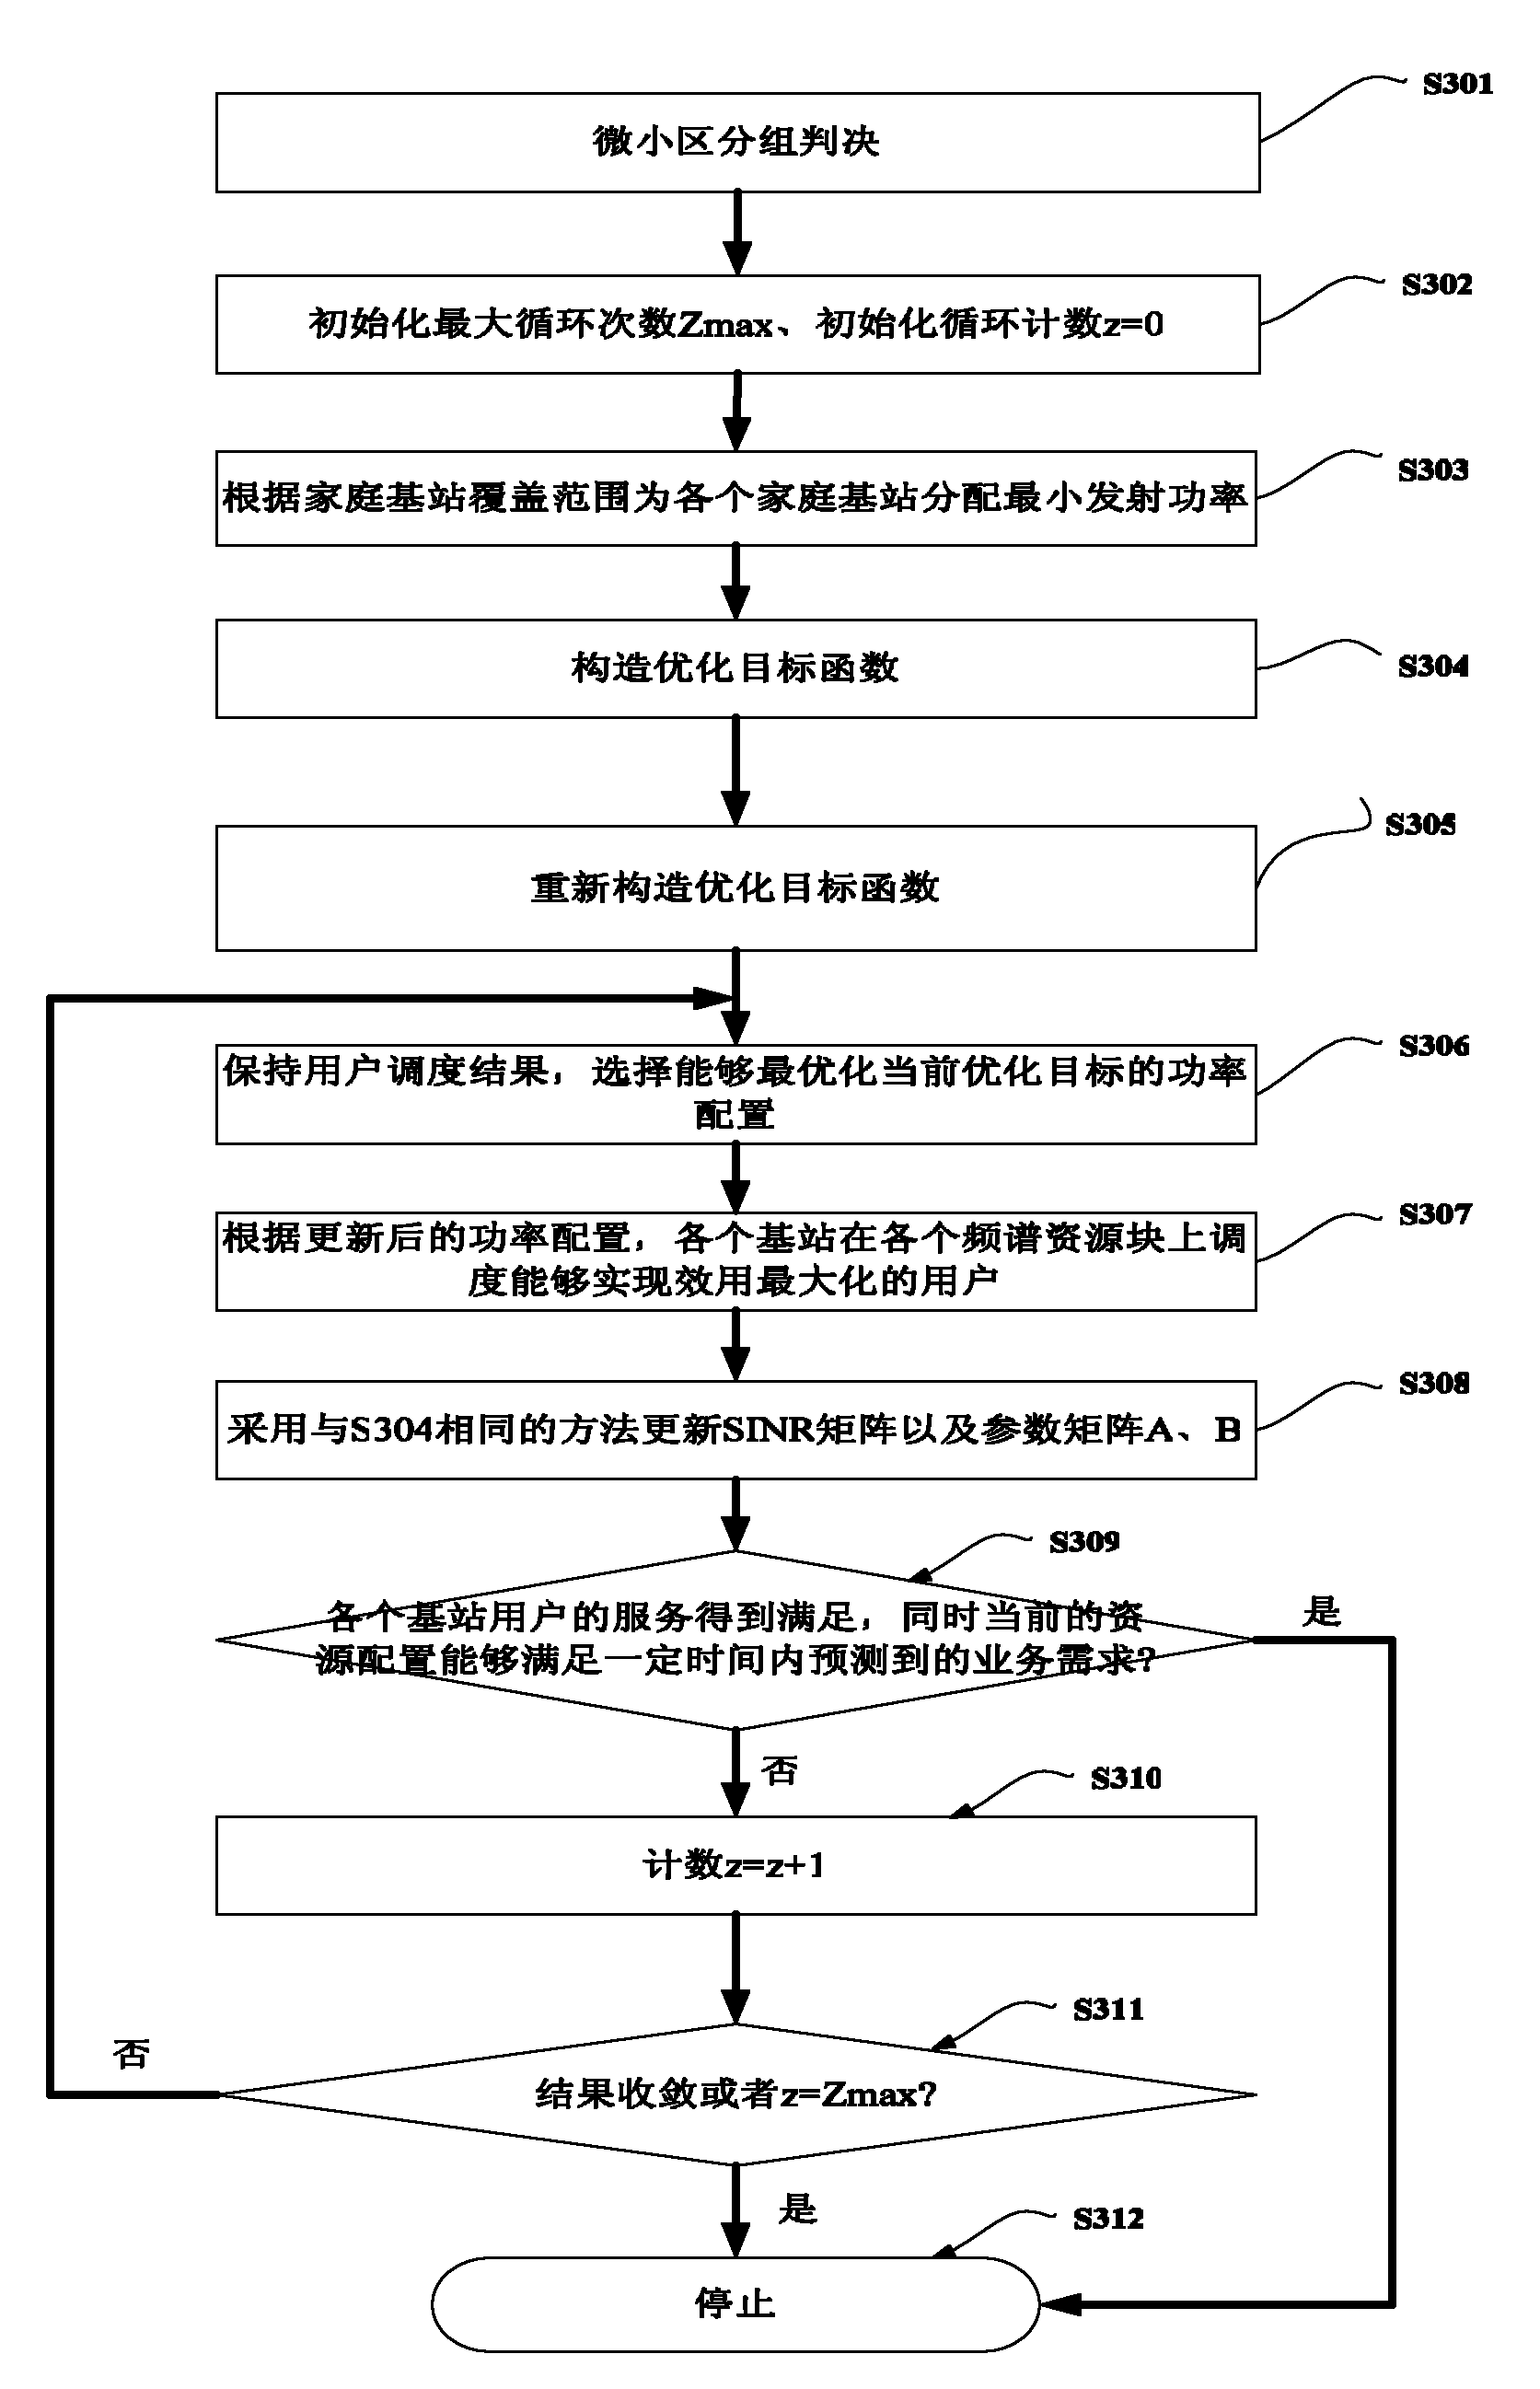 Home base station interference management system and method